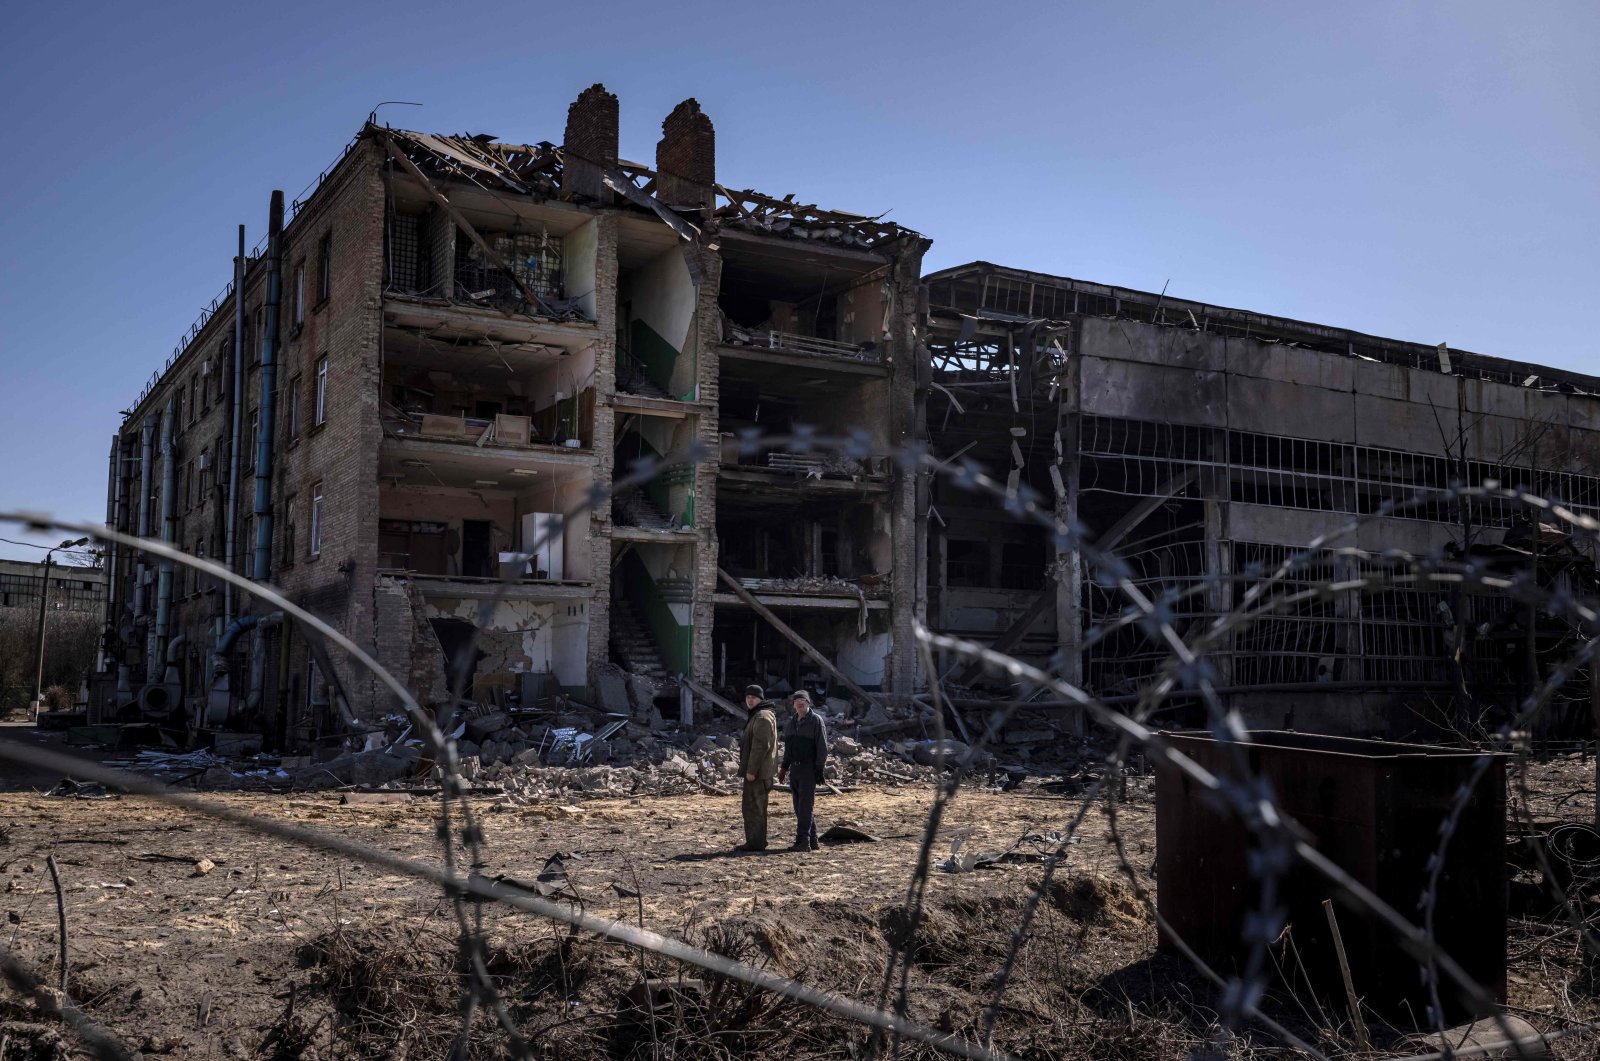 People stand beside damaged buildings at the Vizar company military-industrial complex, after the site was hit by overnight Russian strikes, in the town of Vyshneve, southwestern suburbs of Kyiv, Ukraine, April 15, 2022. (AFP Photo)